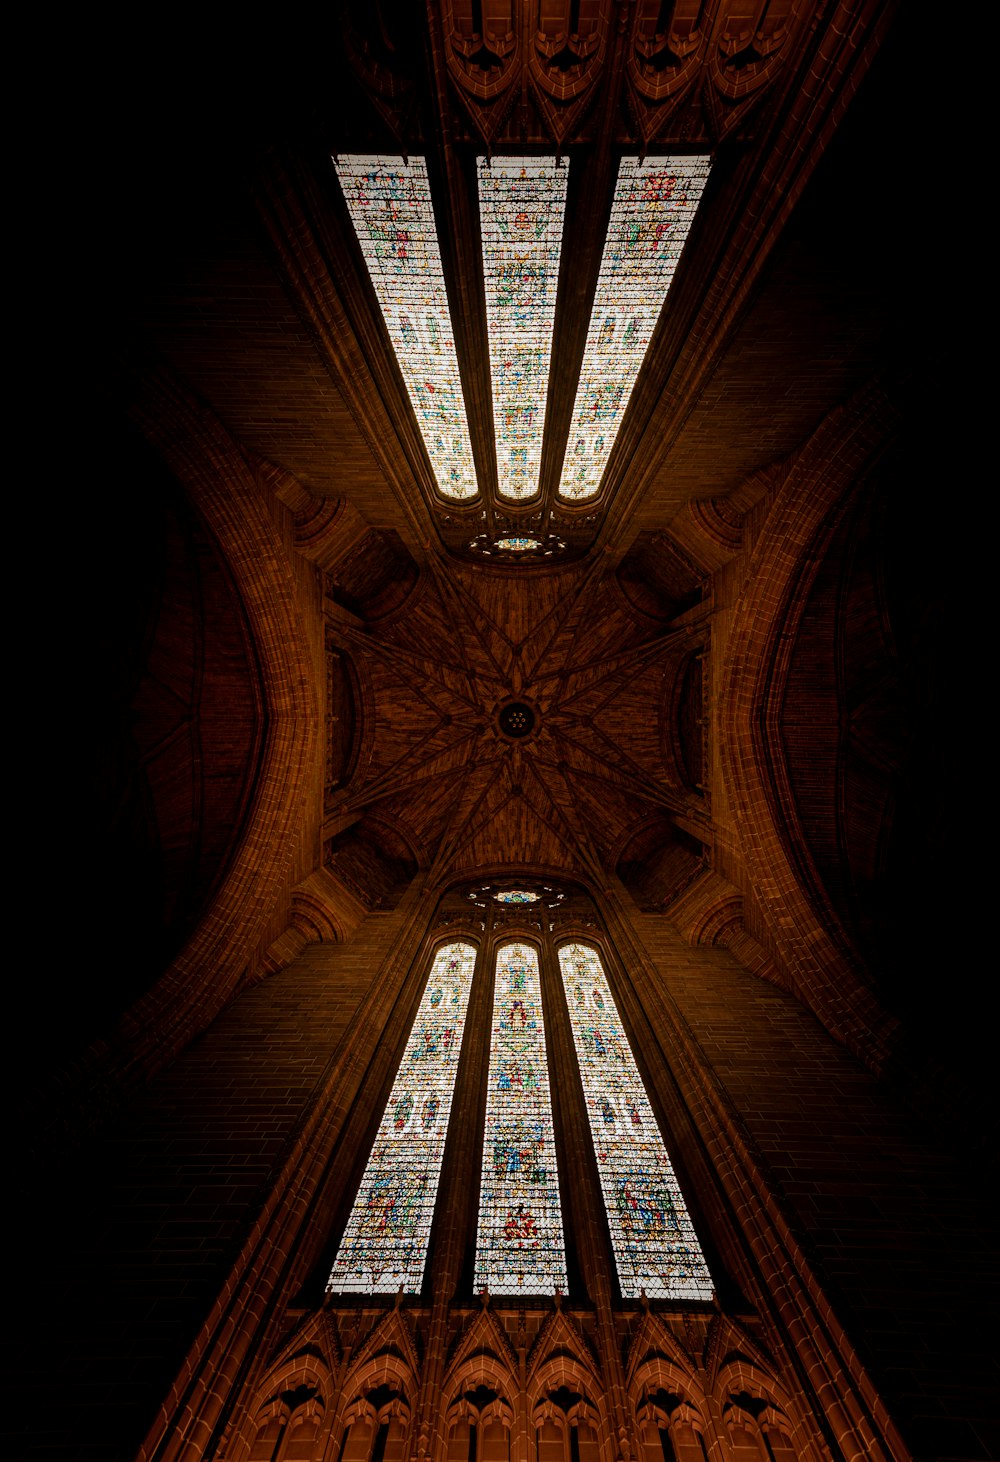 the ceiling of a cathedral with stained glass windows